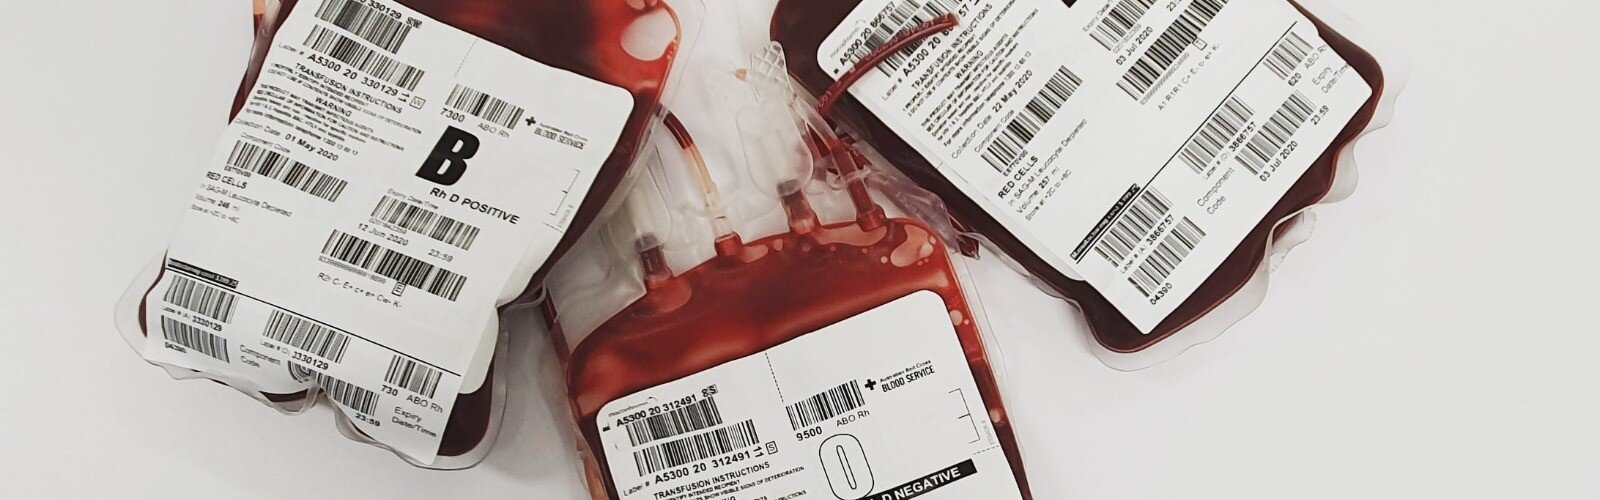 Relying on the community to save lives, MyMichigan Health and Versiti urge public to donate blood picture